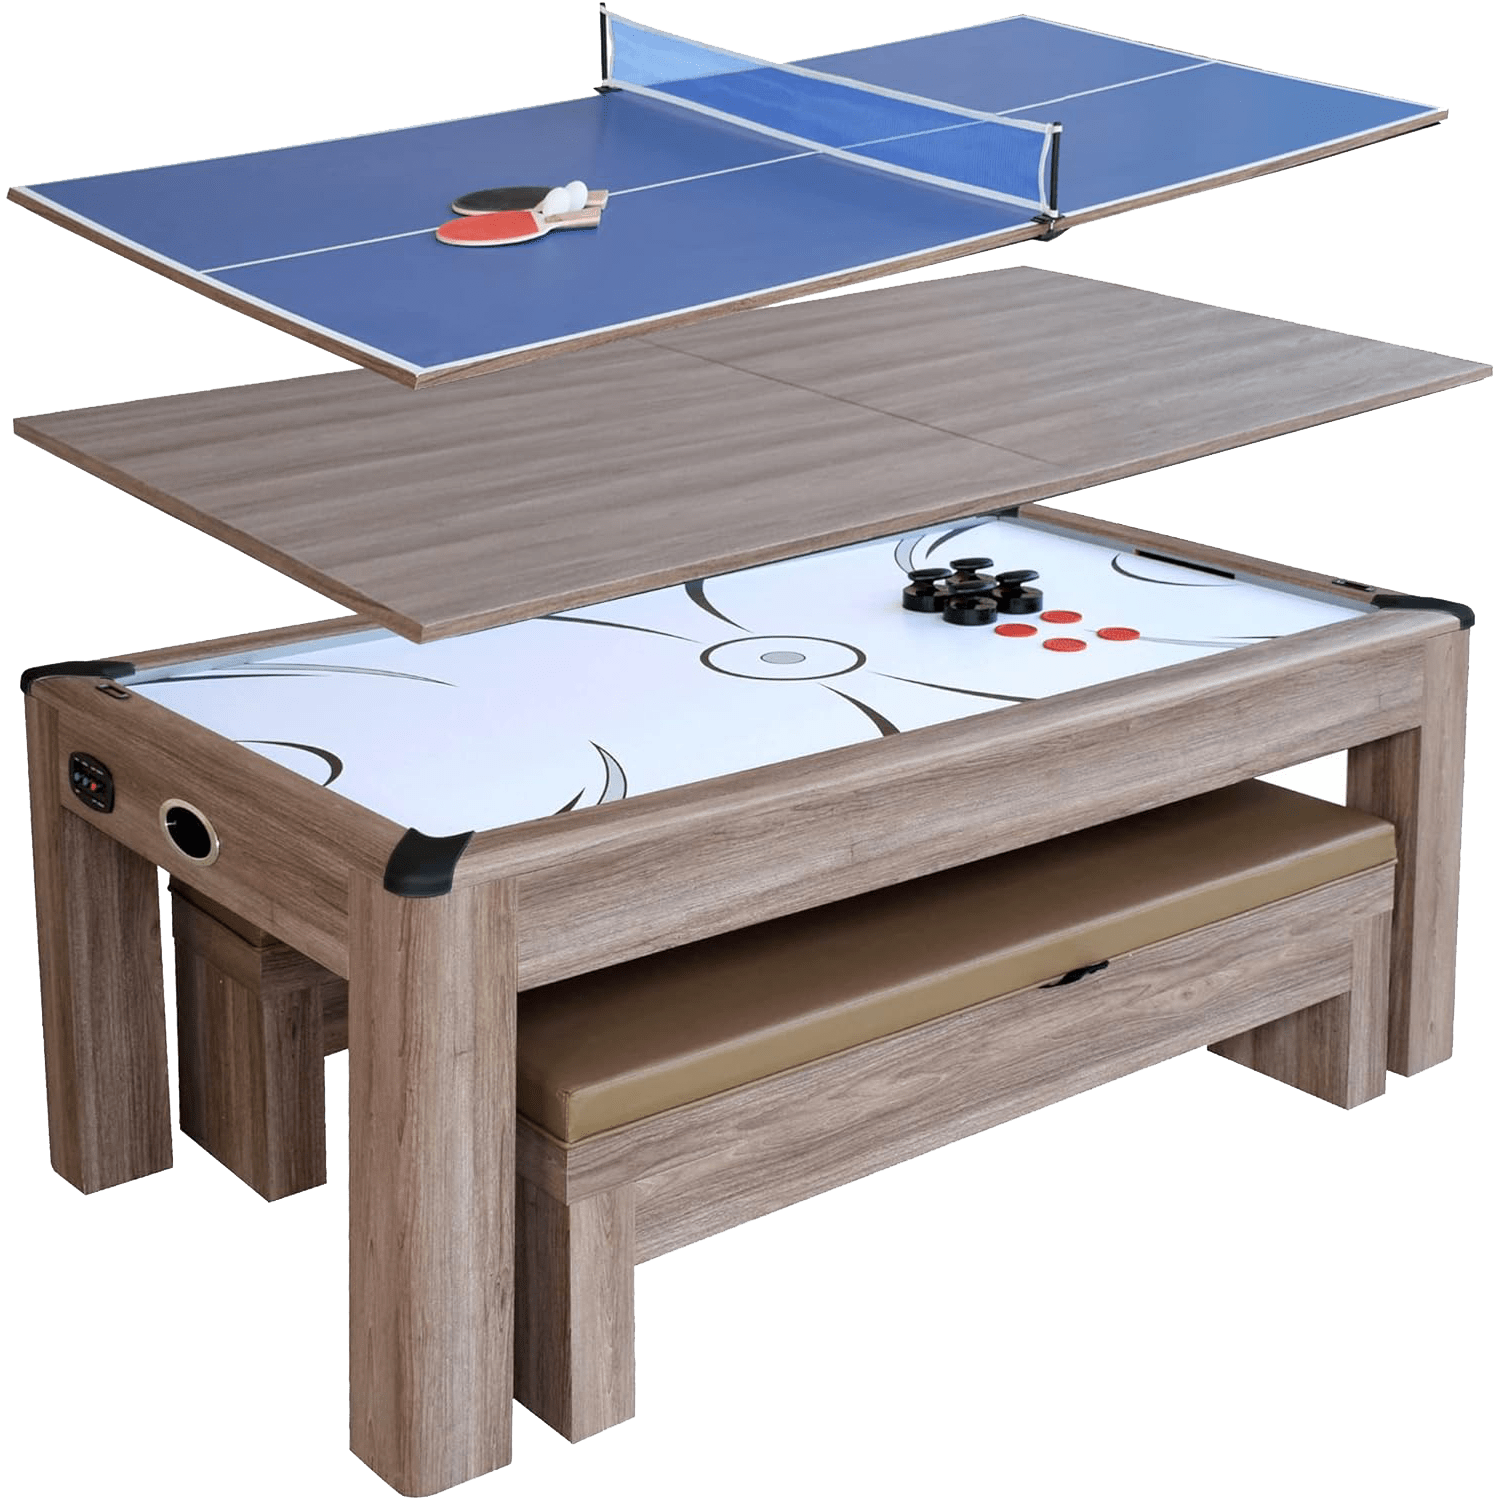 Hathaway Driftwood 7-ft
Best Air Hockey Tables